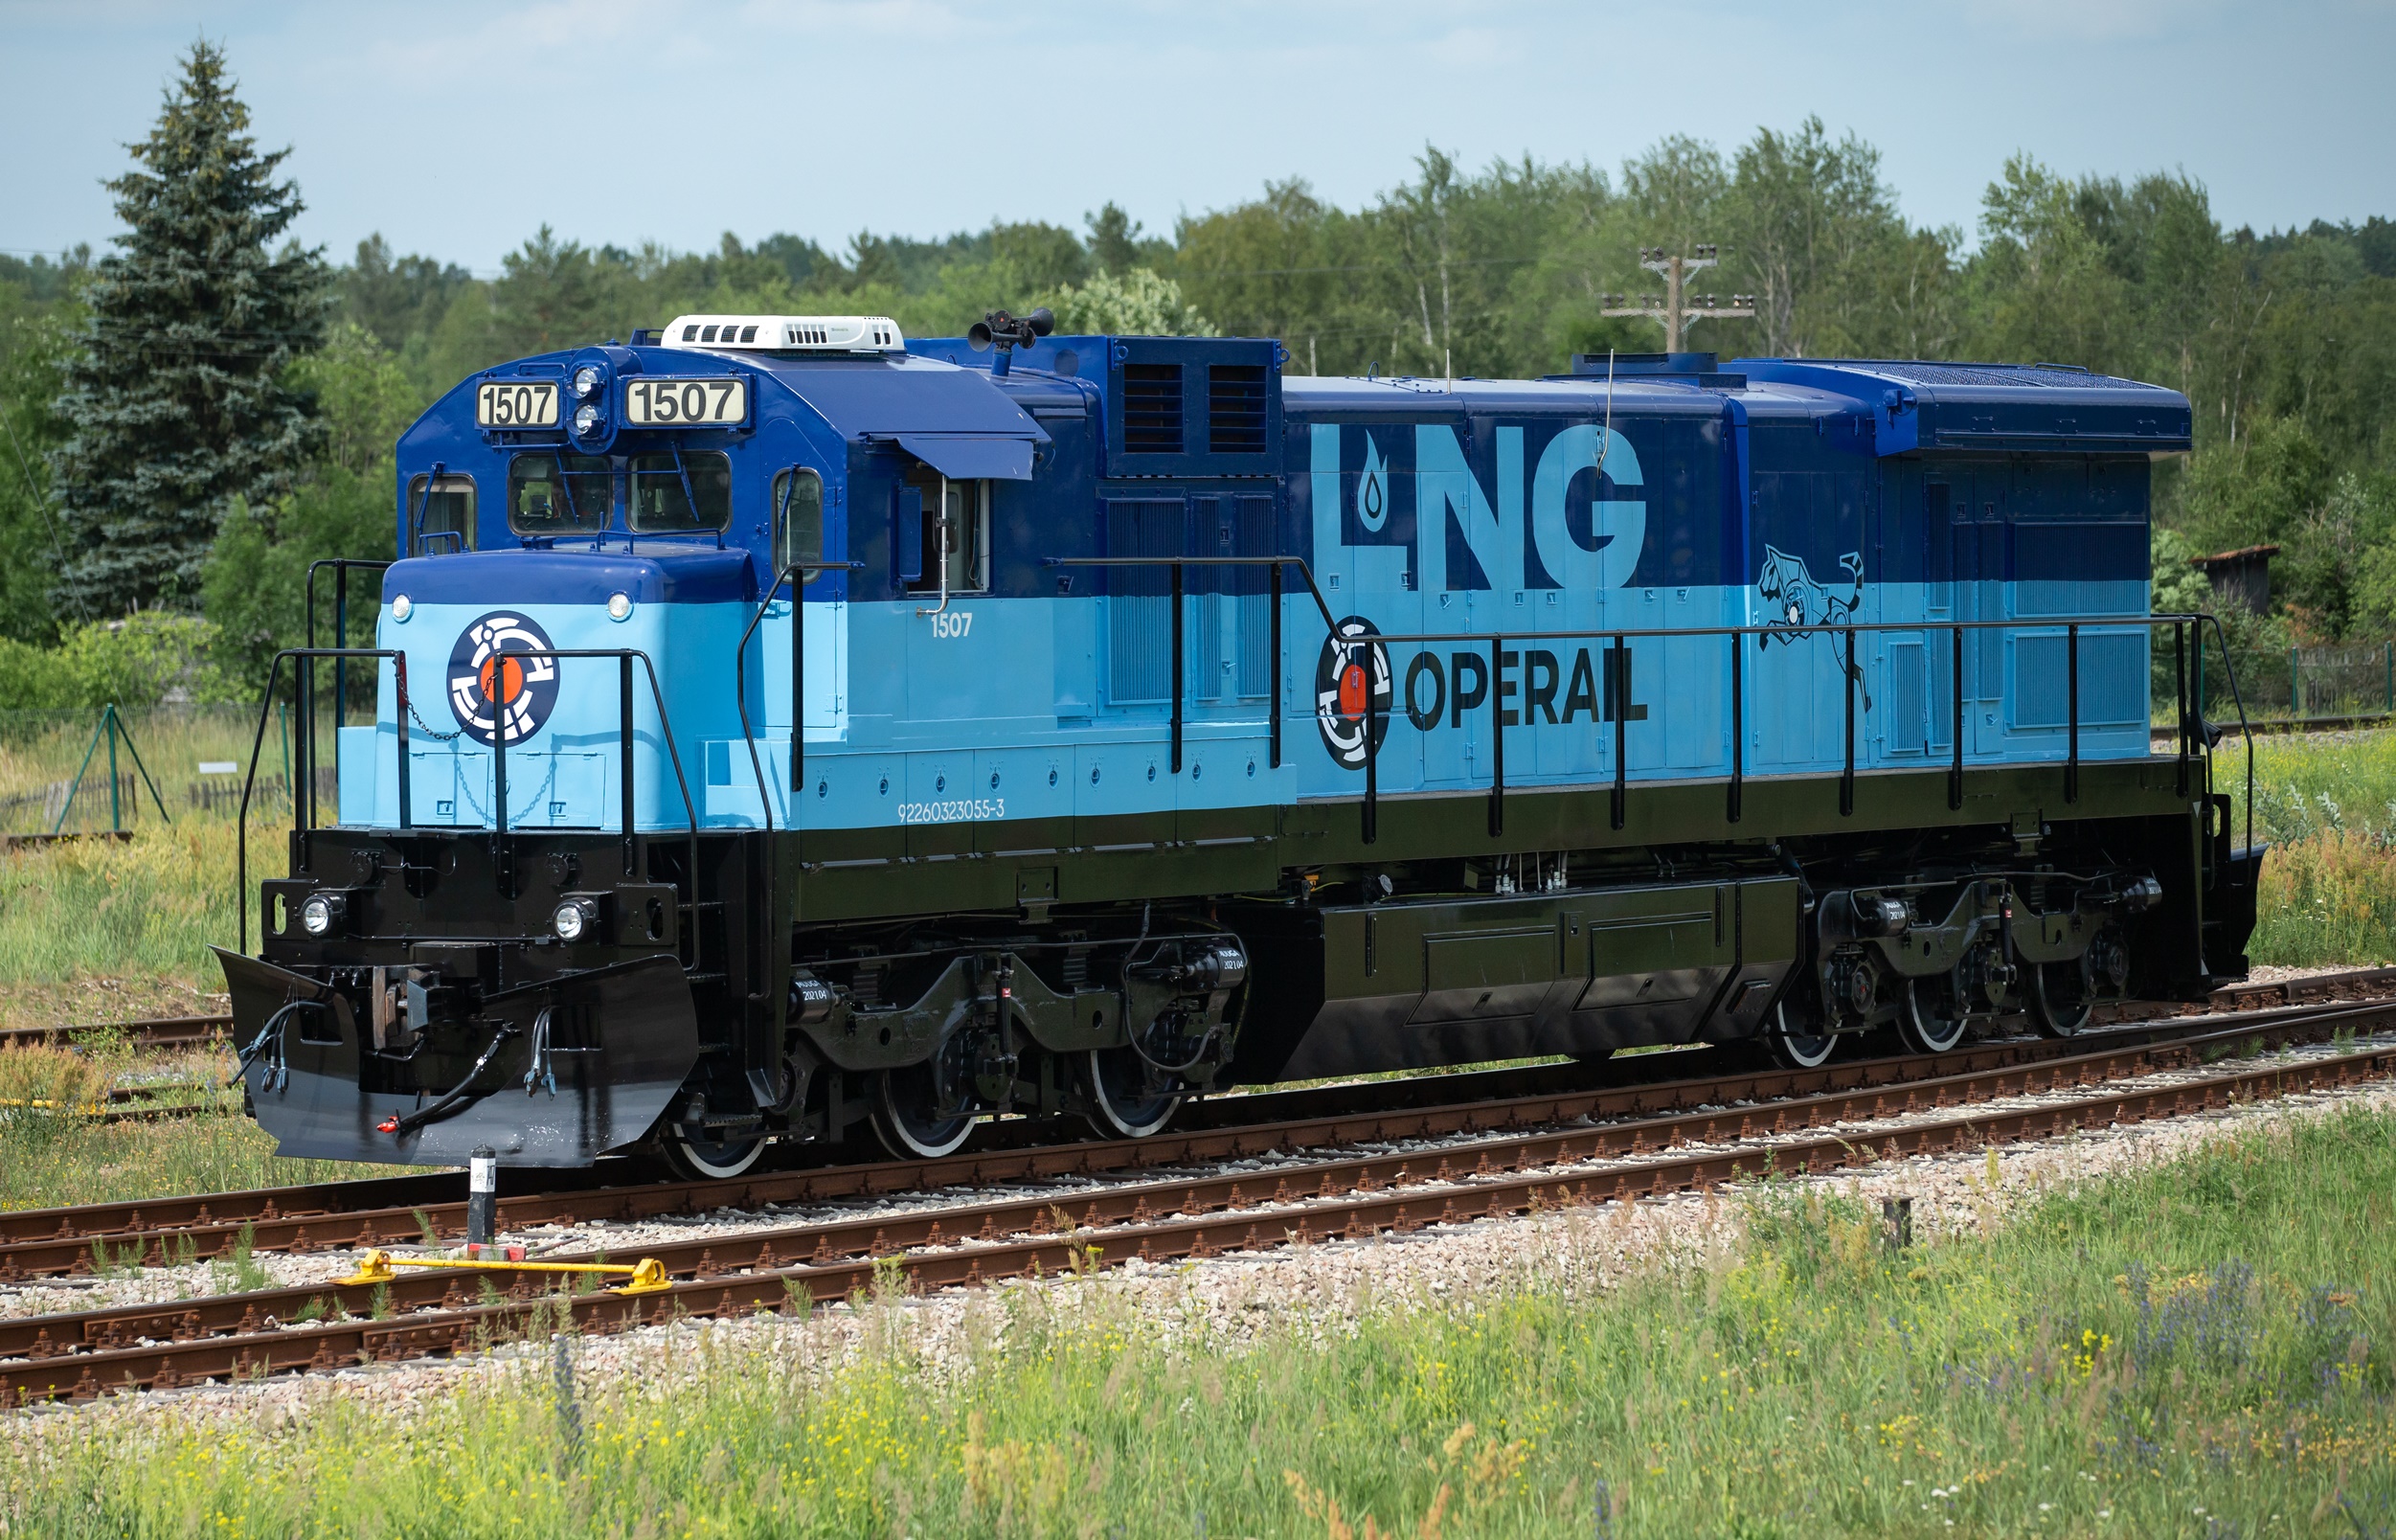 Operail’s first LNG freight locomotive is ready